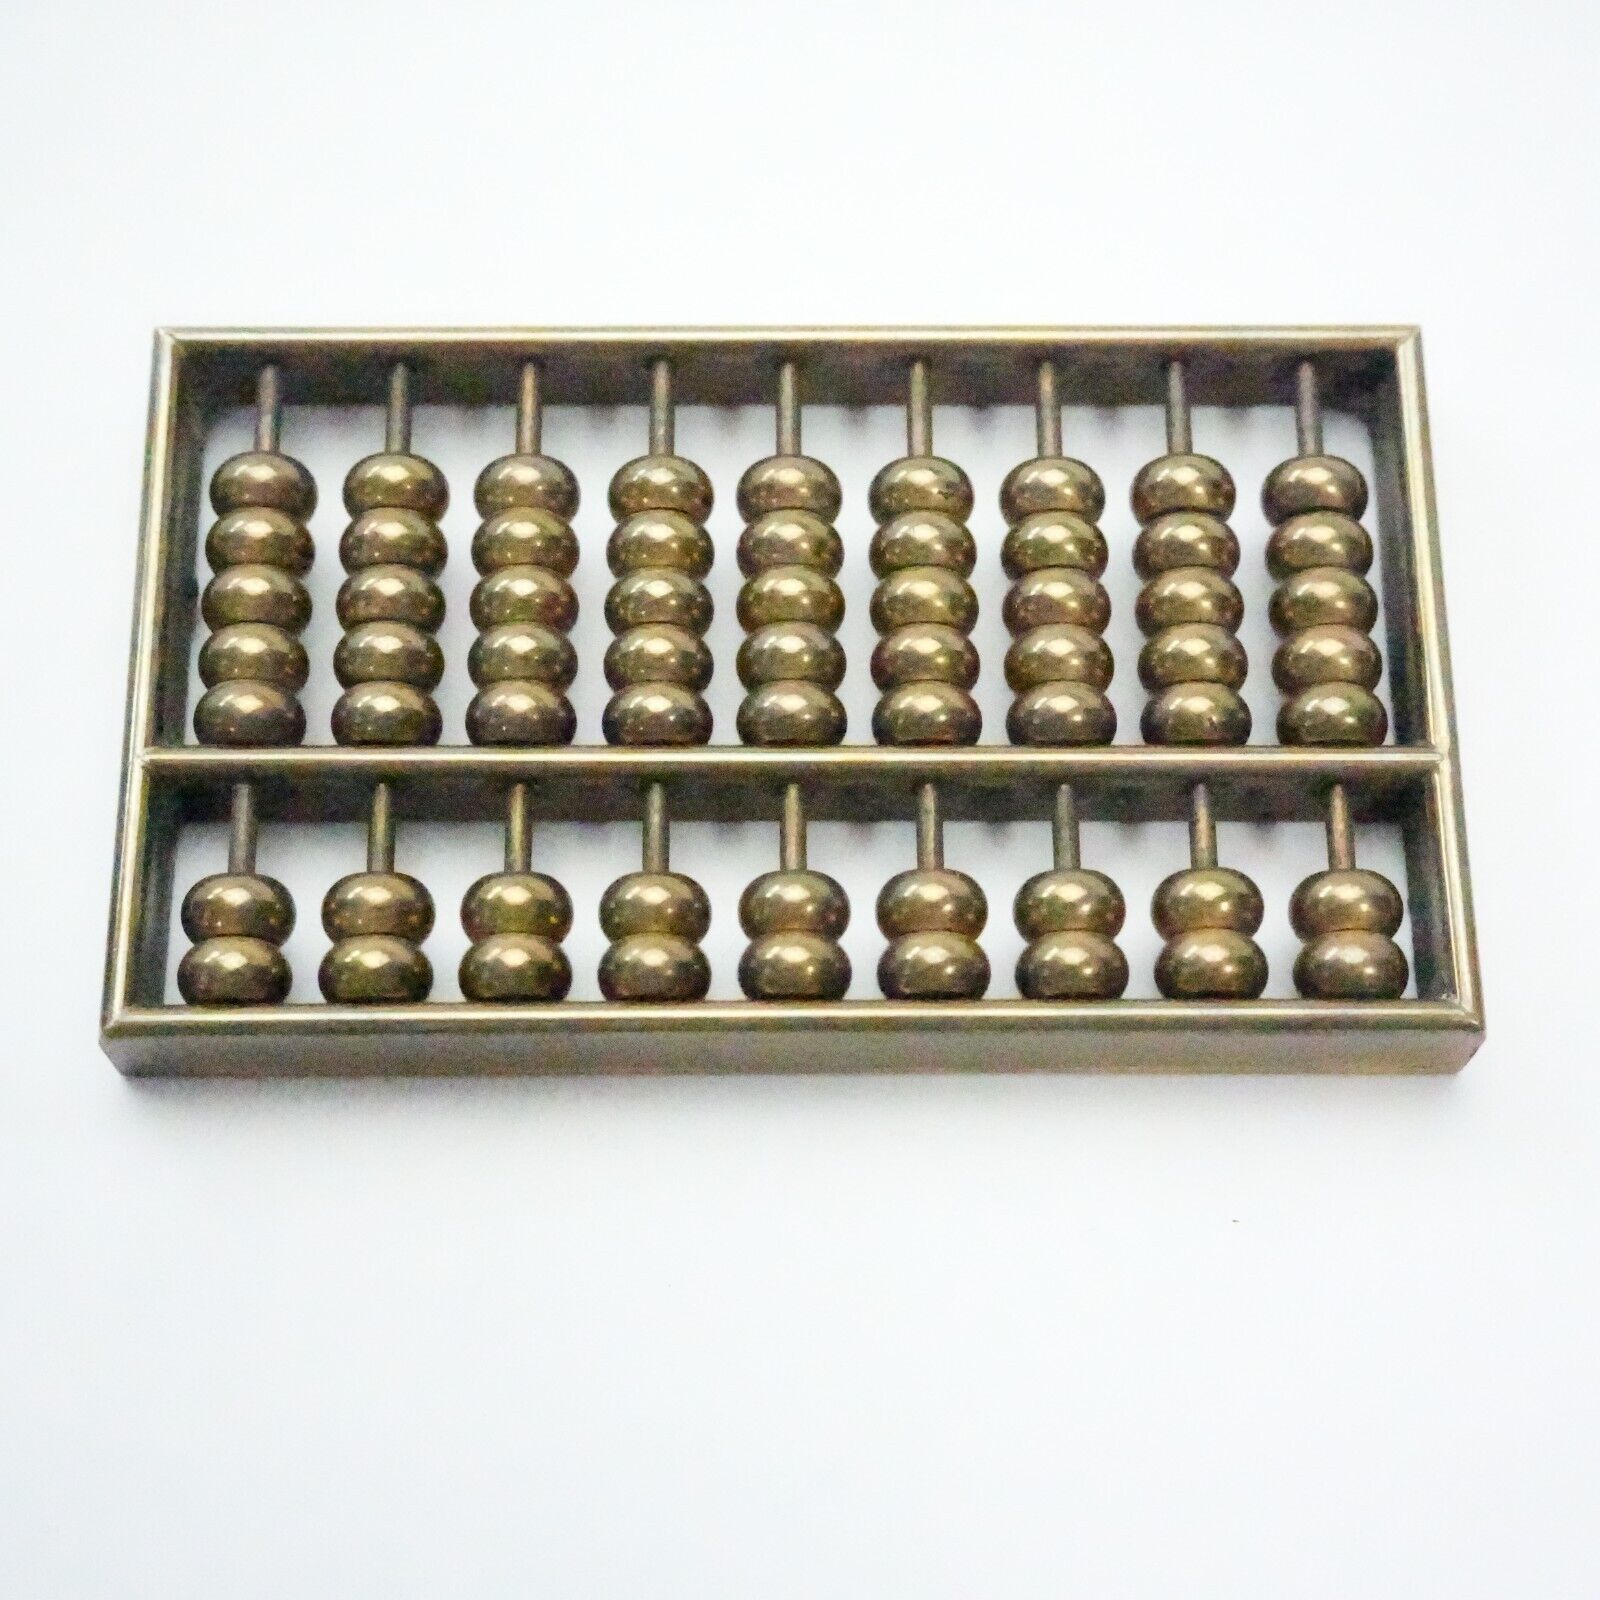 Vintage Brass Abacus Palm Sized Desk Display 3⅛ by 1¾ in